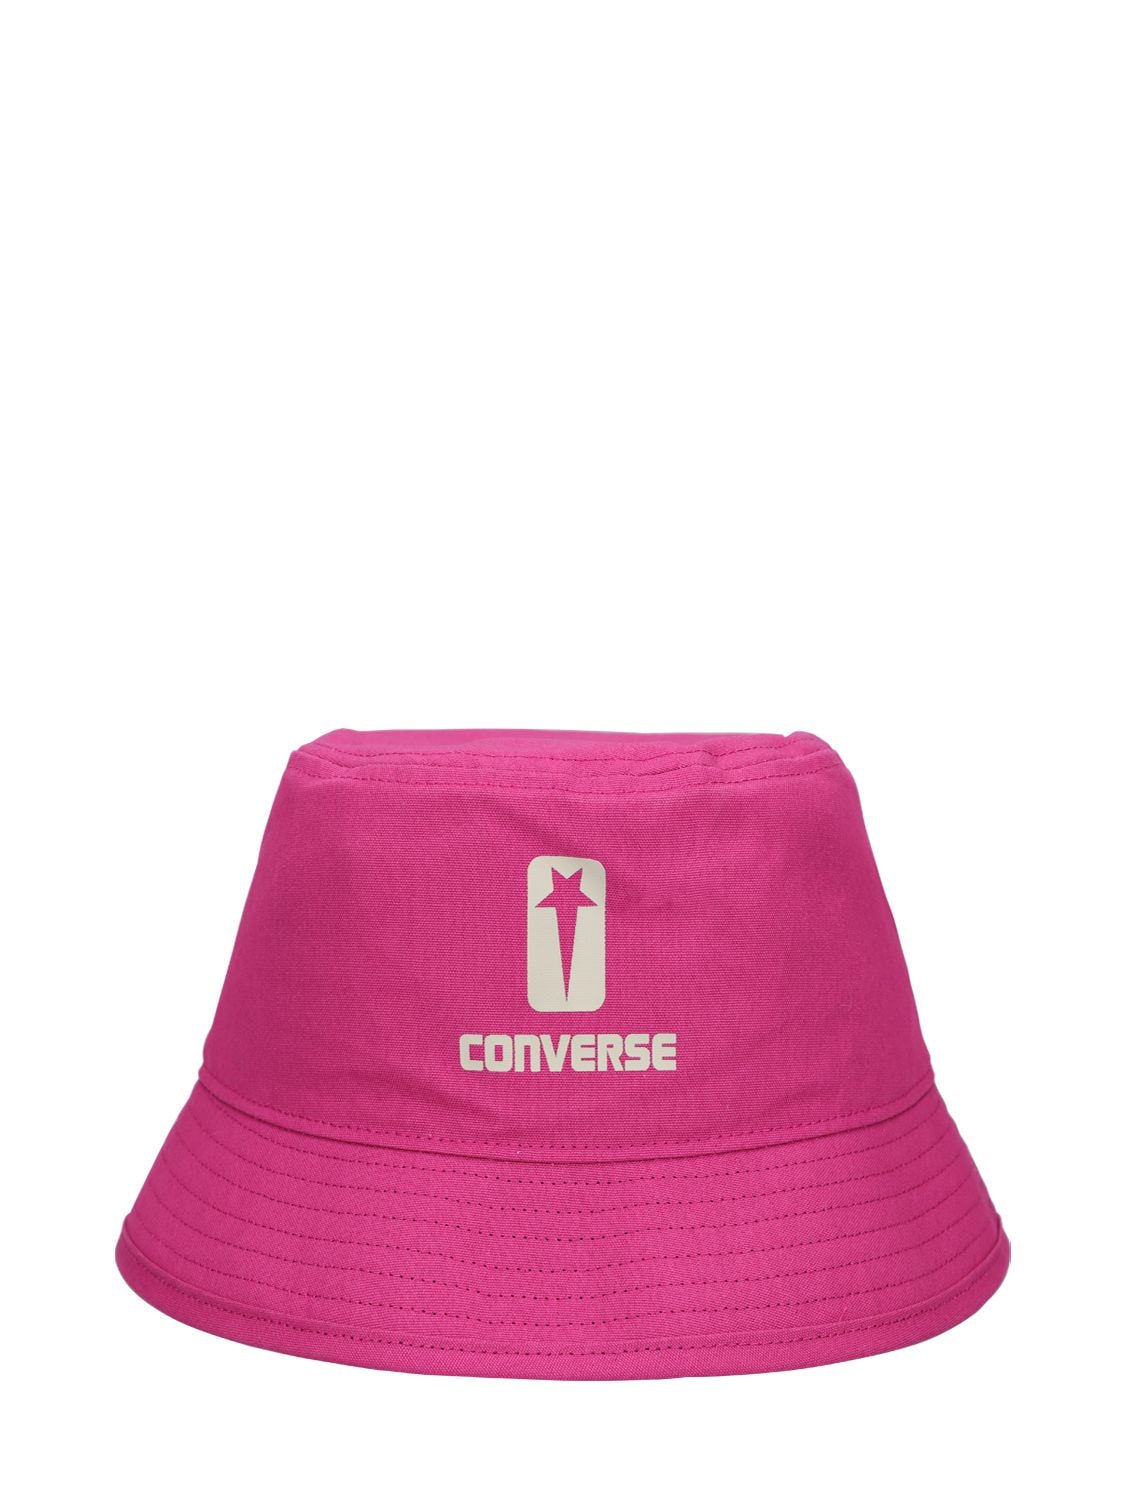 Image of Converse Printed Cotton Bucket Hat